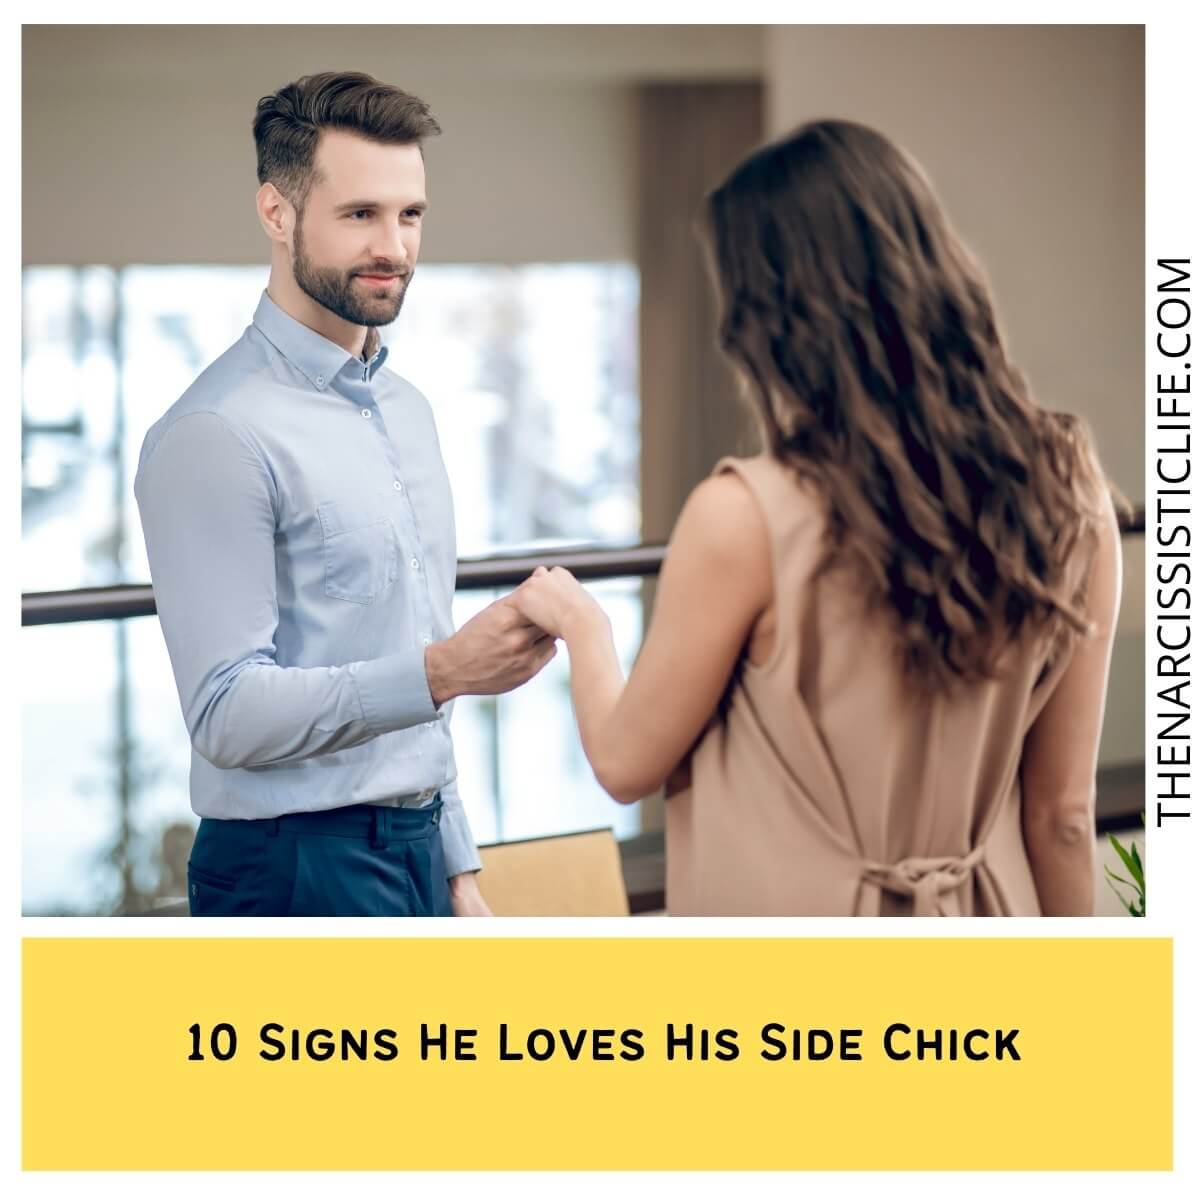 10 Signs He Loves His Side Chick 1 